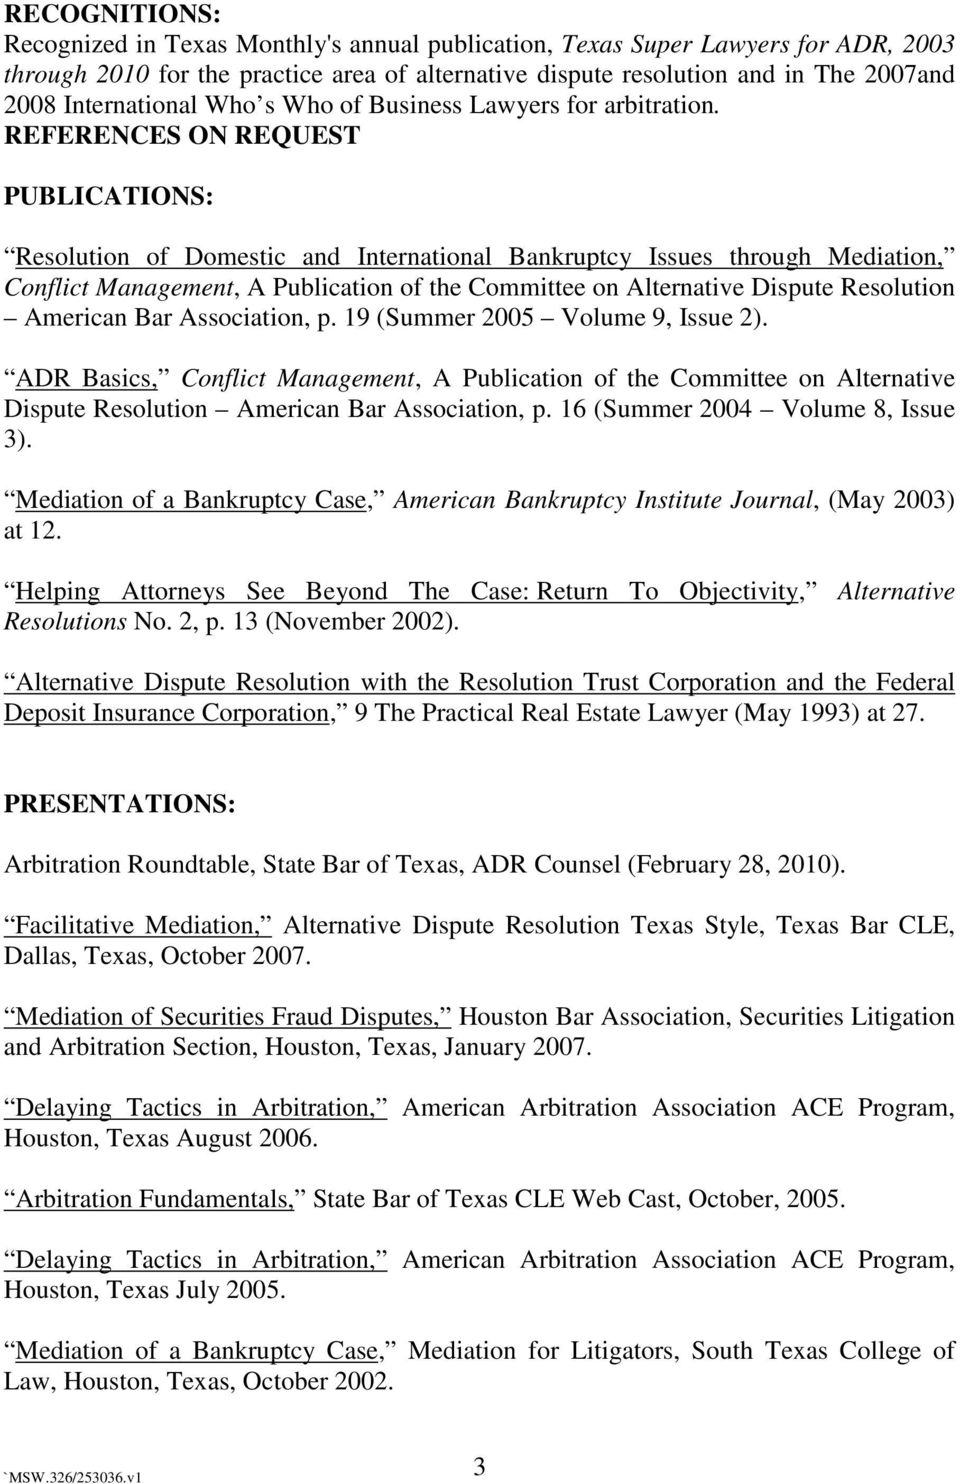 REFERENCES ON REQUEST PUBLICATIONS: Resolution of Domestic and International Bankruptcy Issues through Mediation, Conflict Management, A Publication of the Committee on Alternative Dispute Resolution